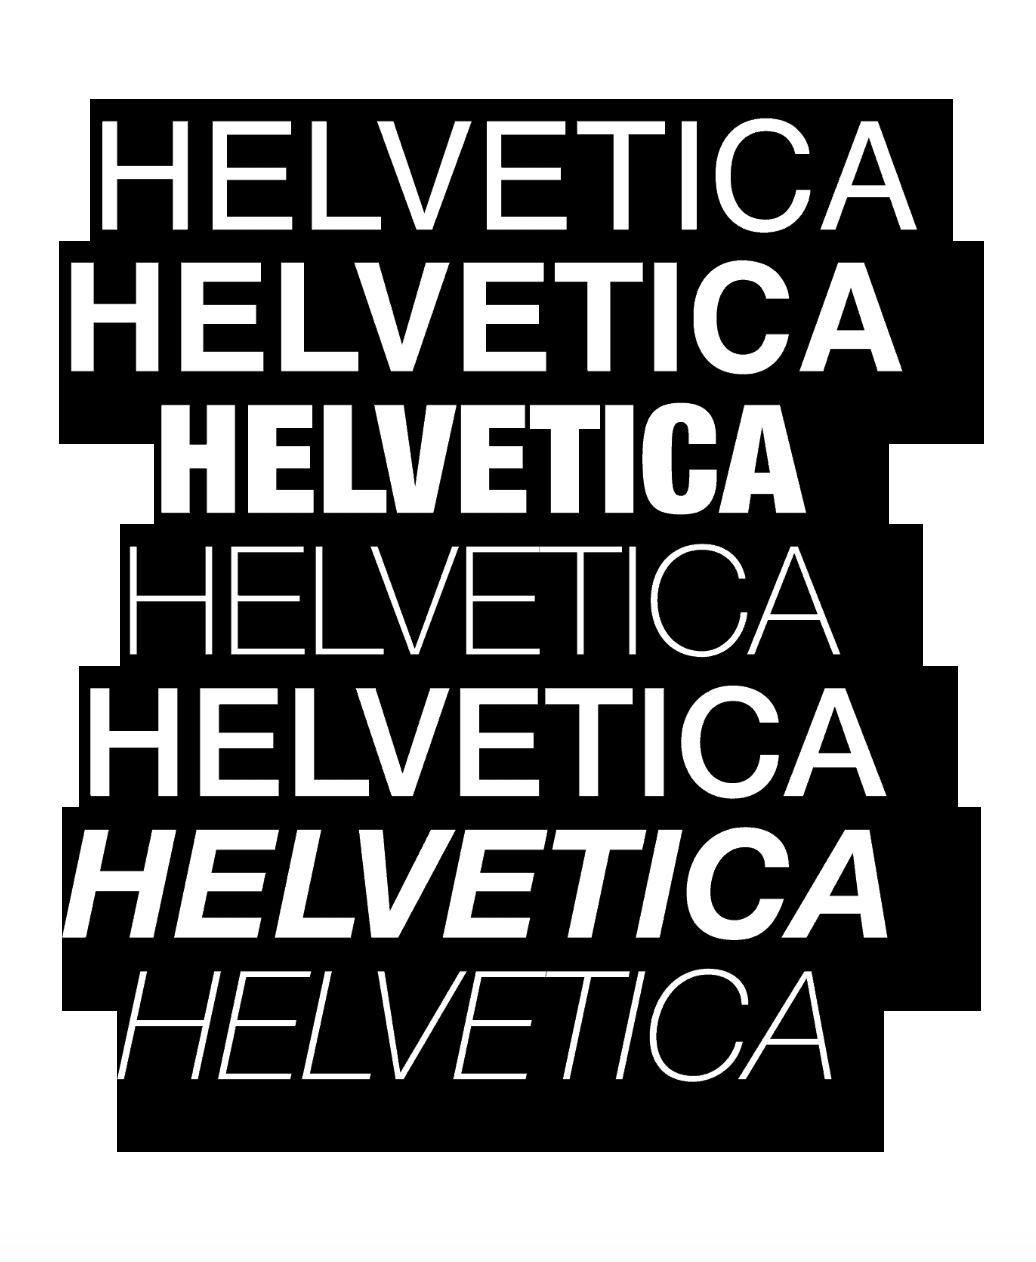 Why Helvetica?